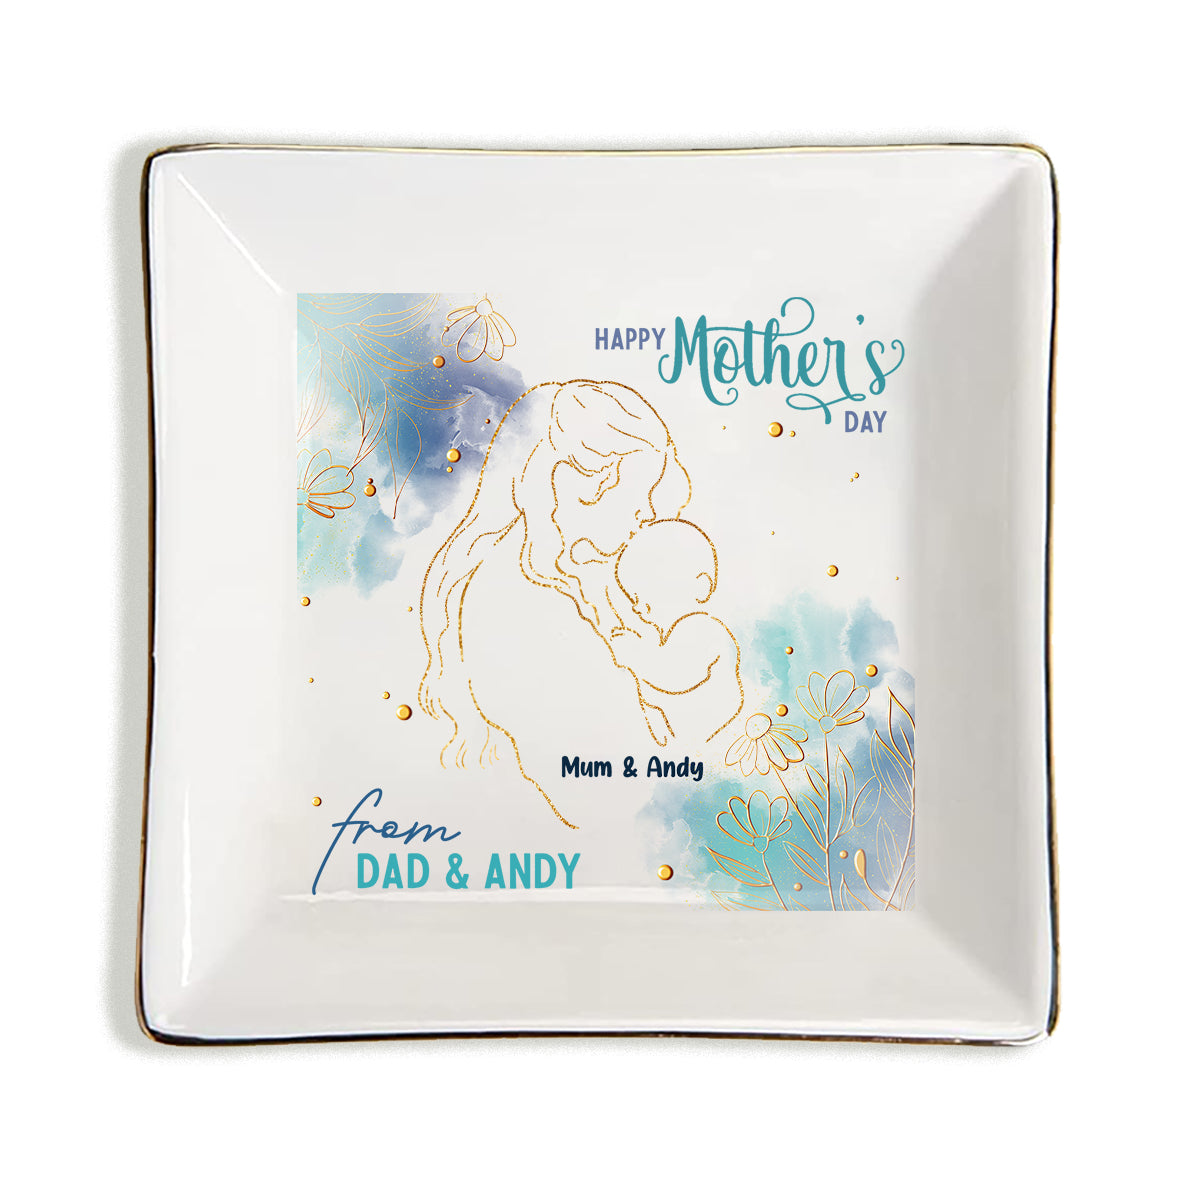 Happy Mother's Day - Personalized Mother's Day Husband And Wife Jewelry Dish